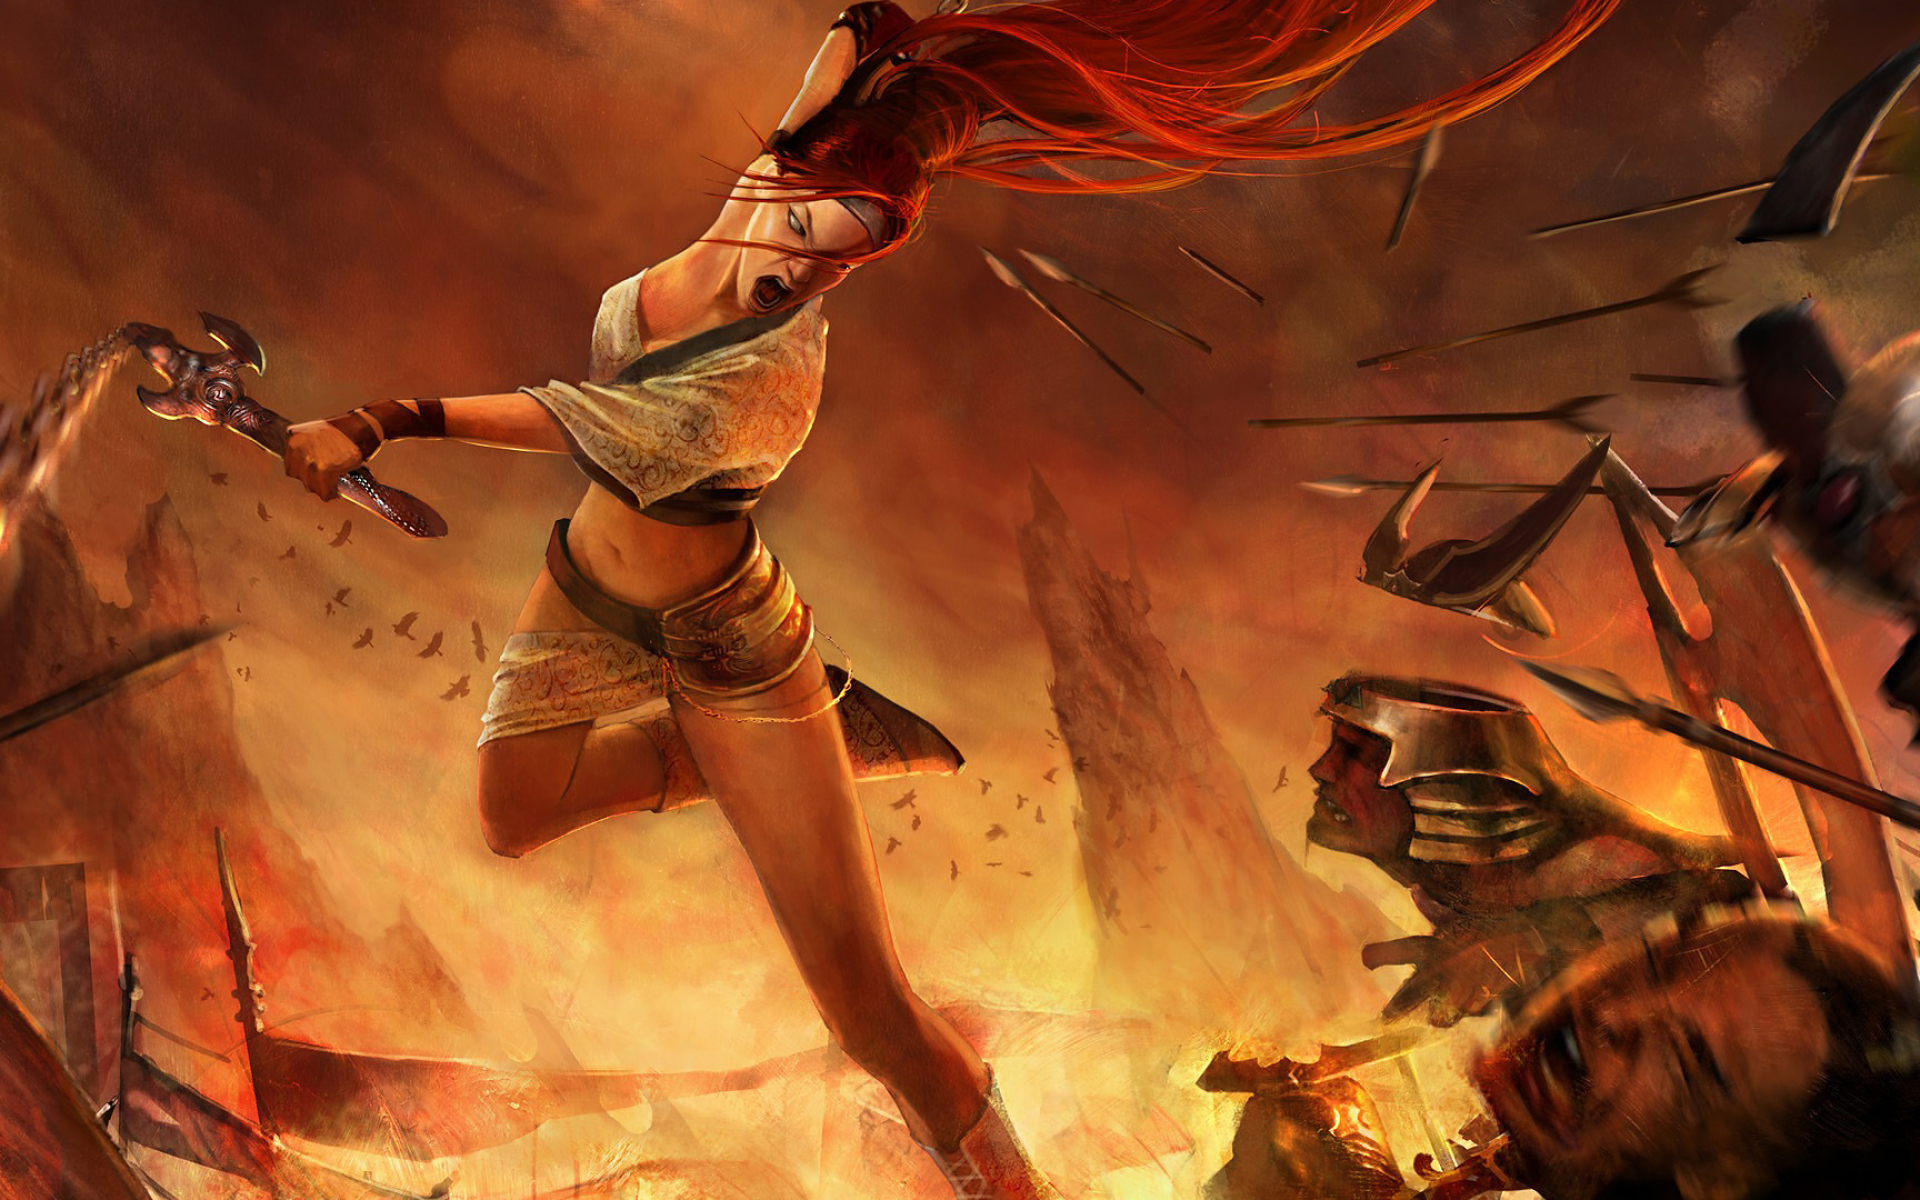 Heavenly Sword game, Awesome wallpapers, HD images, All HD wallpapers, 1920x1200 HD Desktop